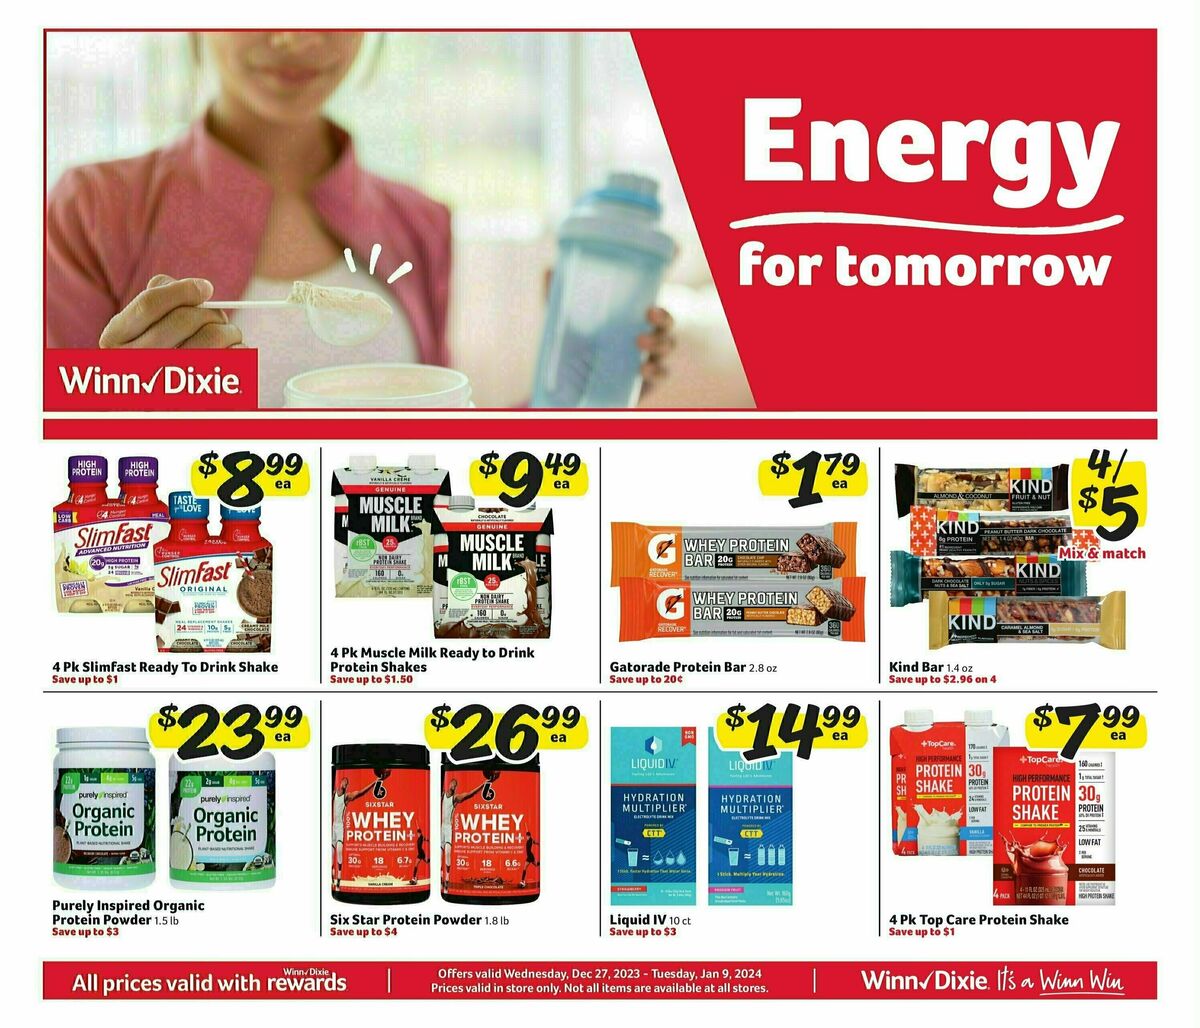 Winn-Dixie Weekly Ad from December 27